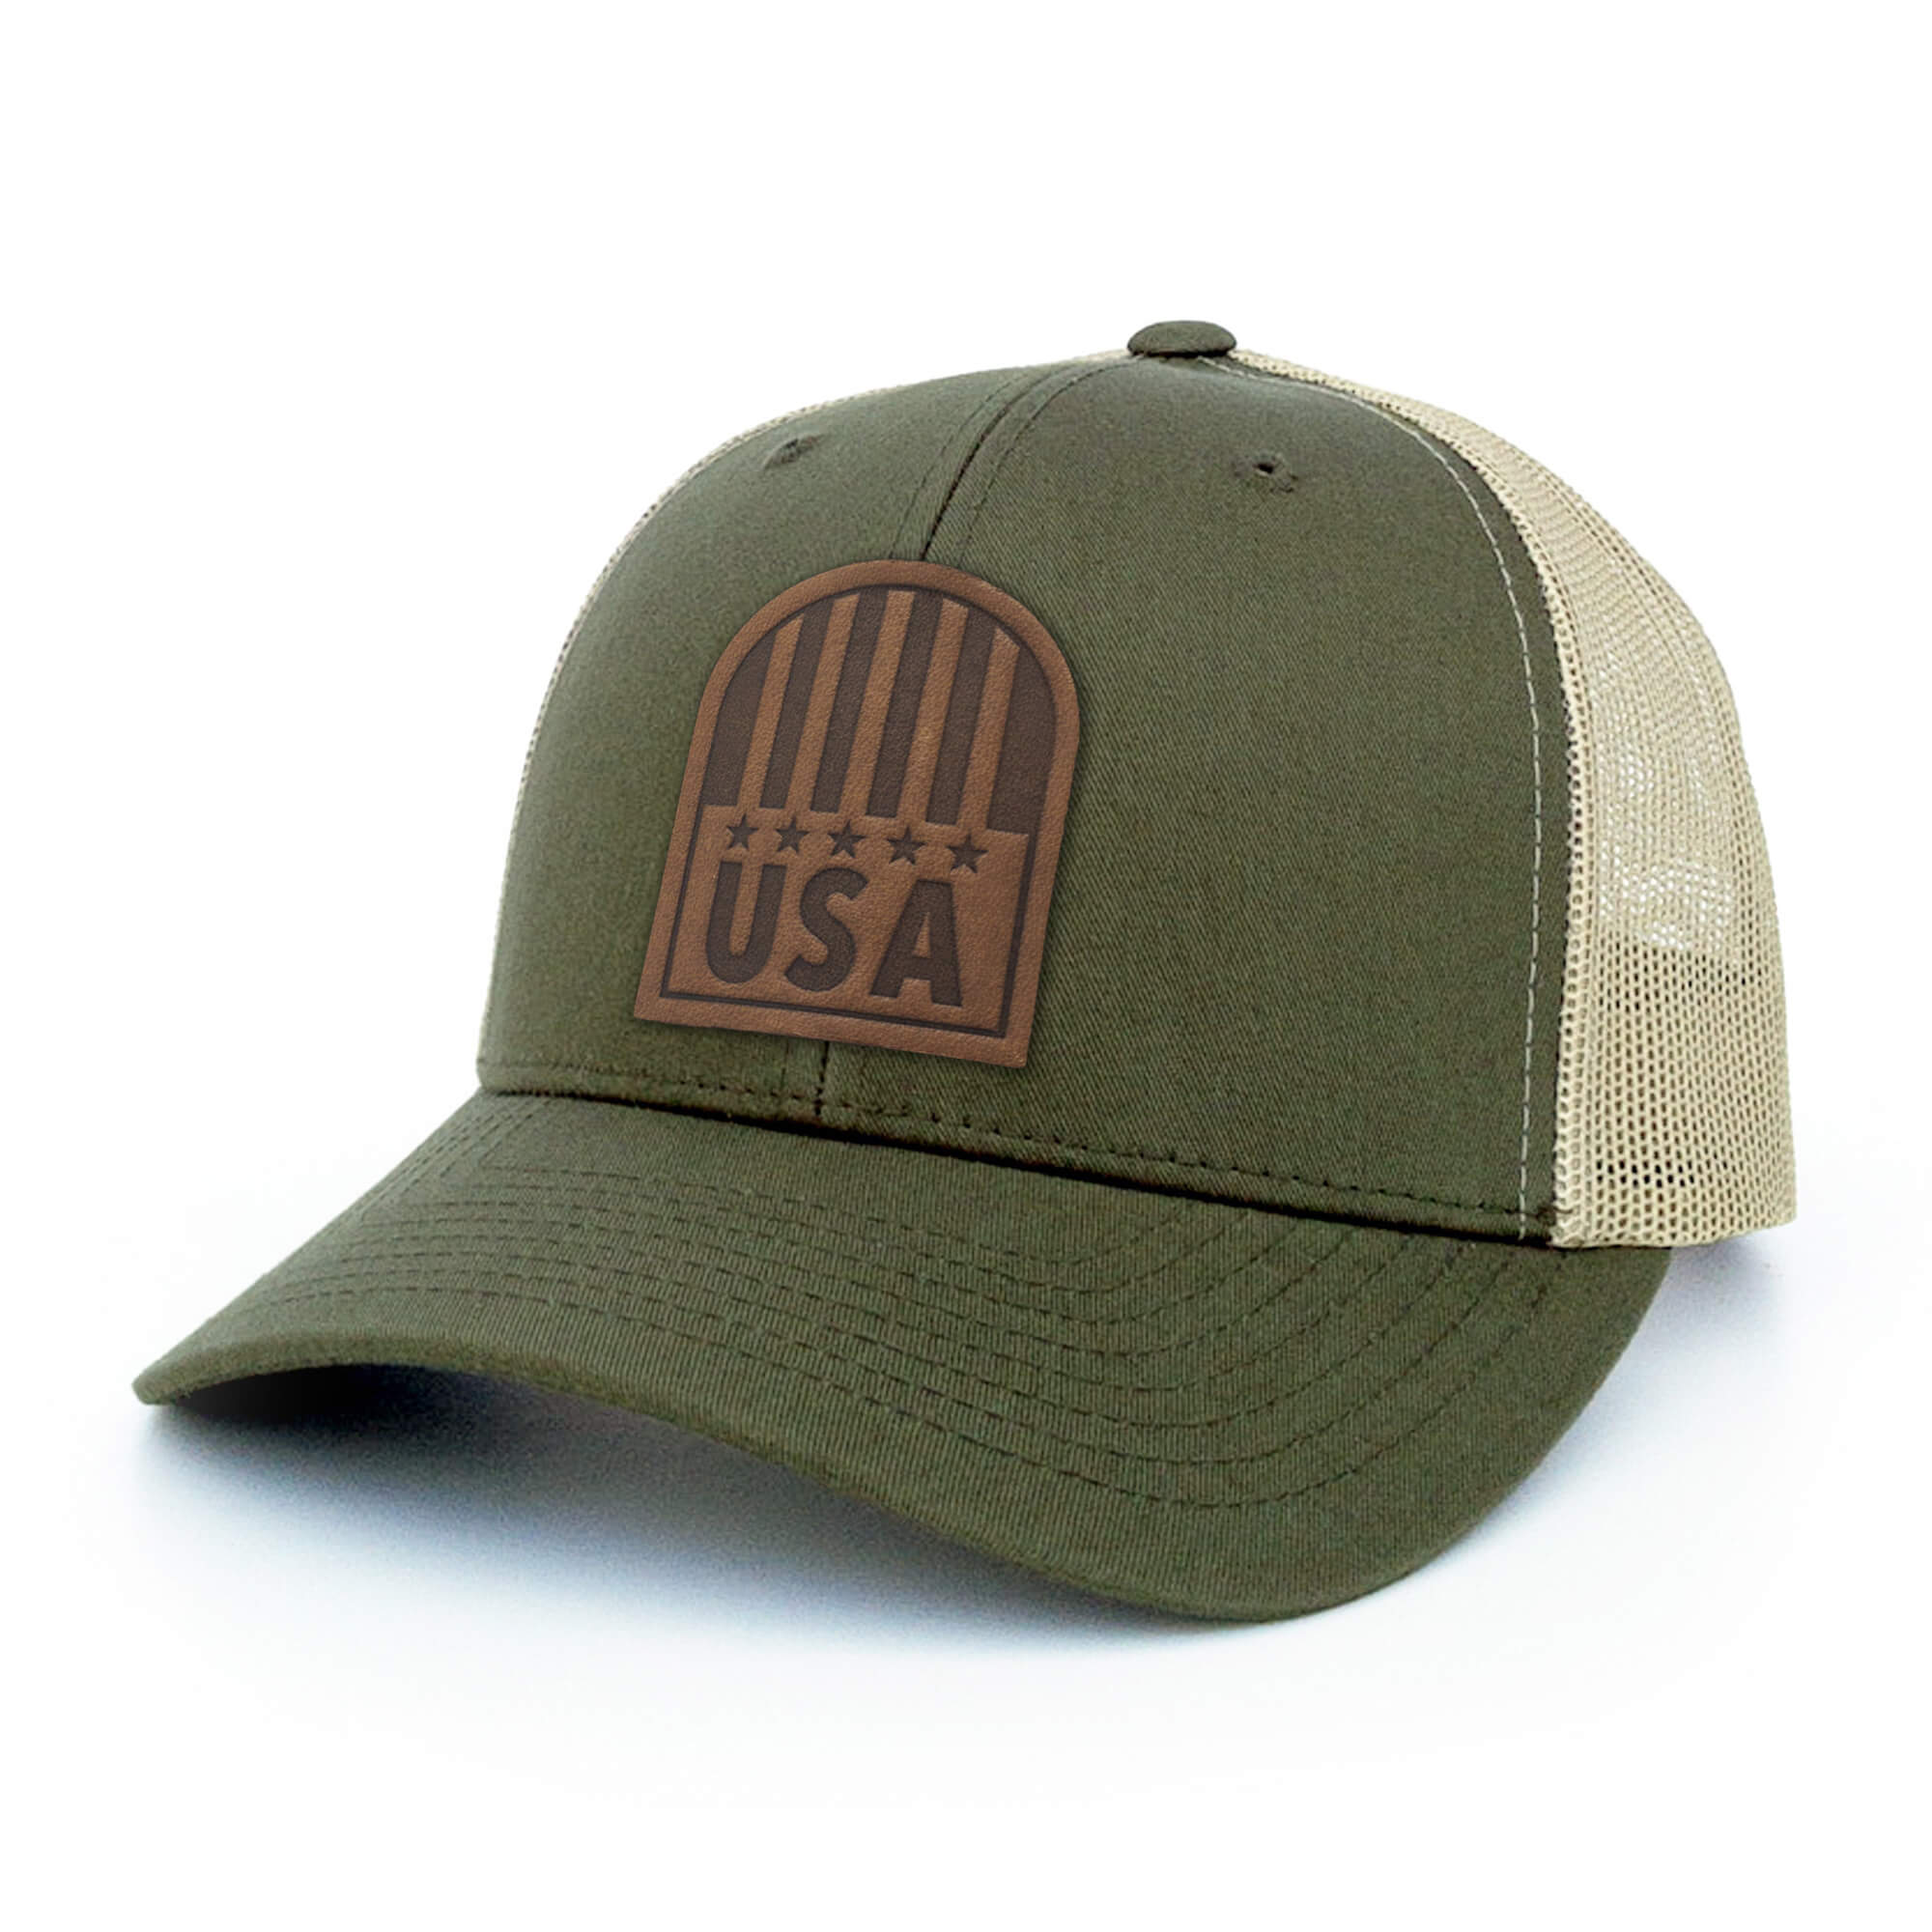 Moss Green and khaki trucker hat with full-grain leather patch of USA Crest | BLACK-003-013, CHARC-003-013, NAVY-003-013, HGREY-003-013, MOSS-003-013, BROWN-003-013